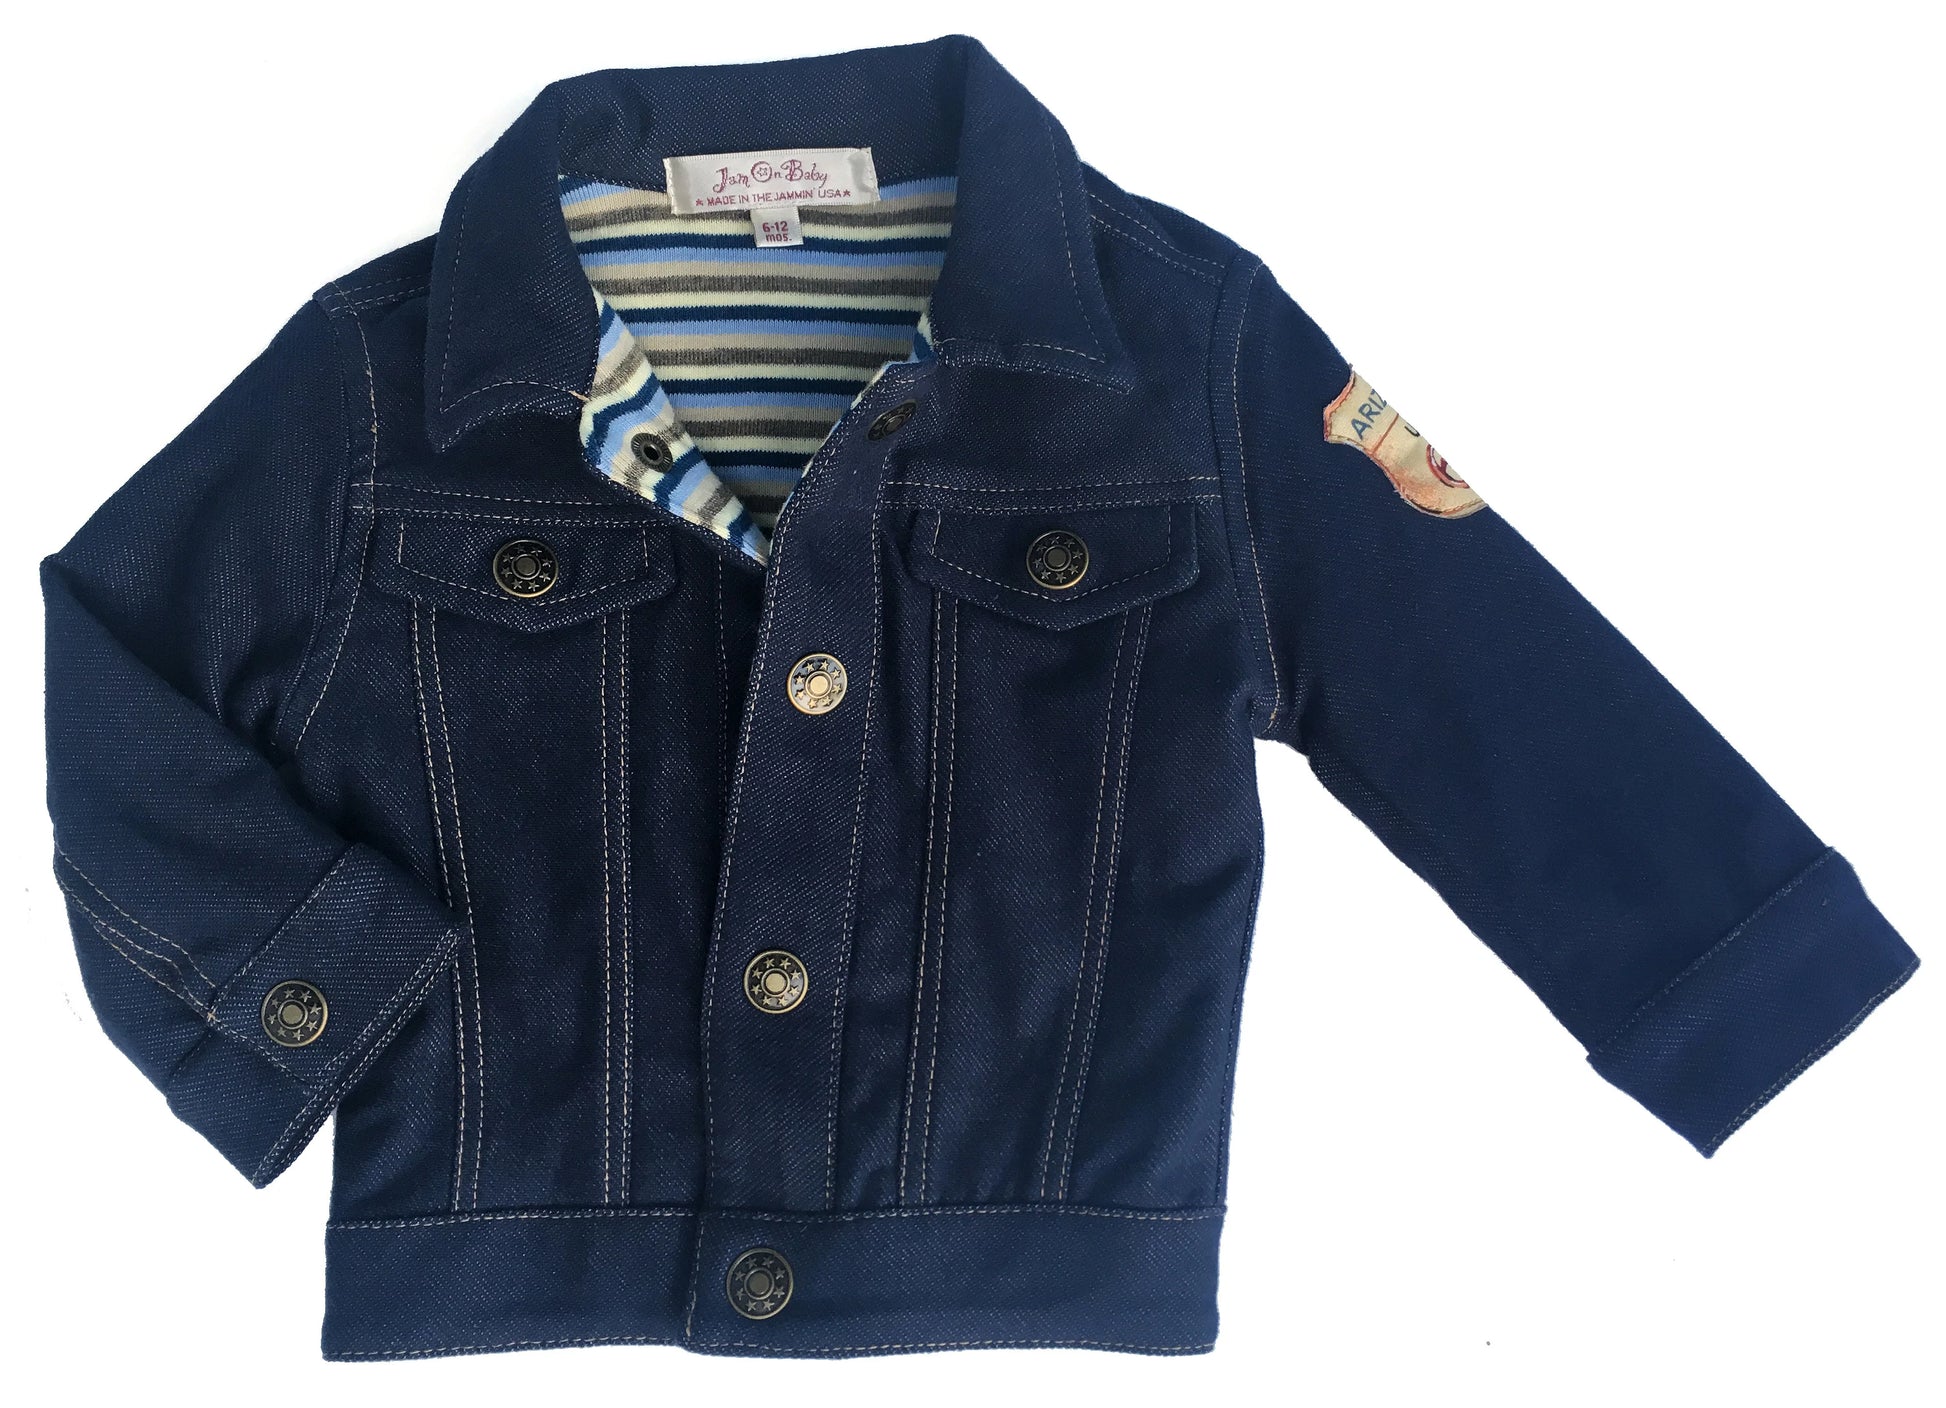 Route 66, boys, soft, comfy, denim jacket,stripe,cotton lining,baby,toddler,cute kids clothes,best,,vintage jean jacket,made in USA